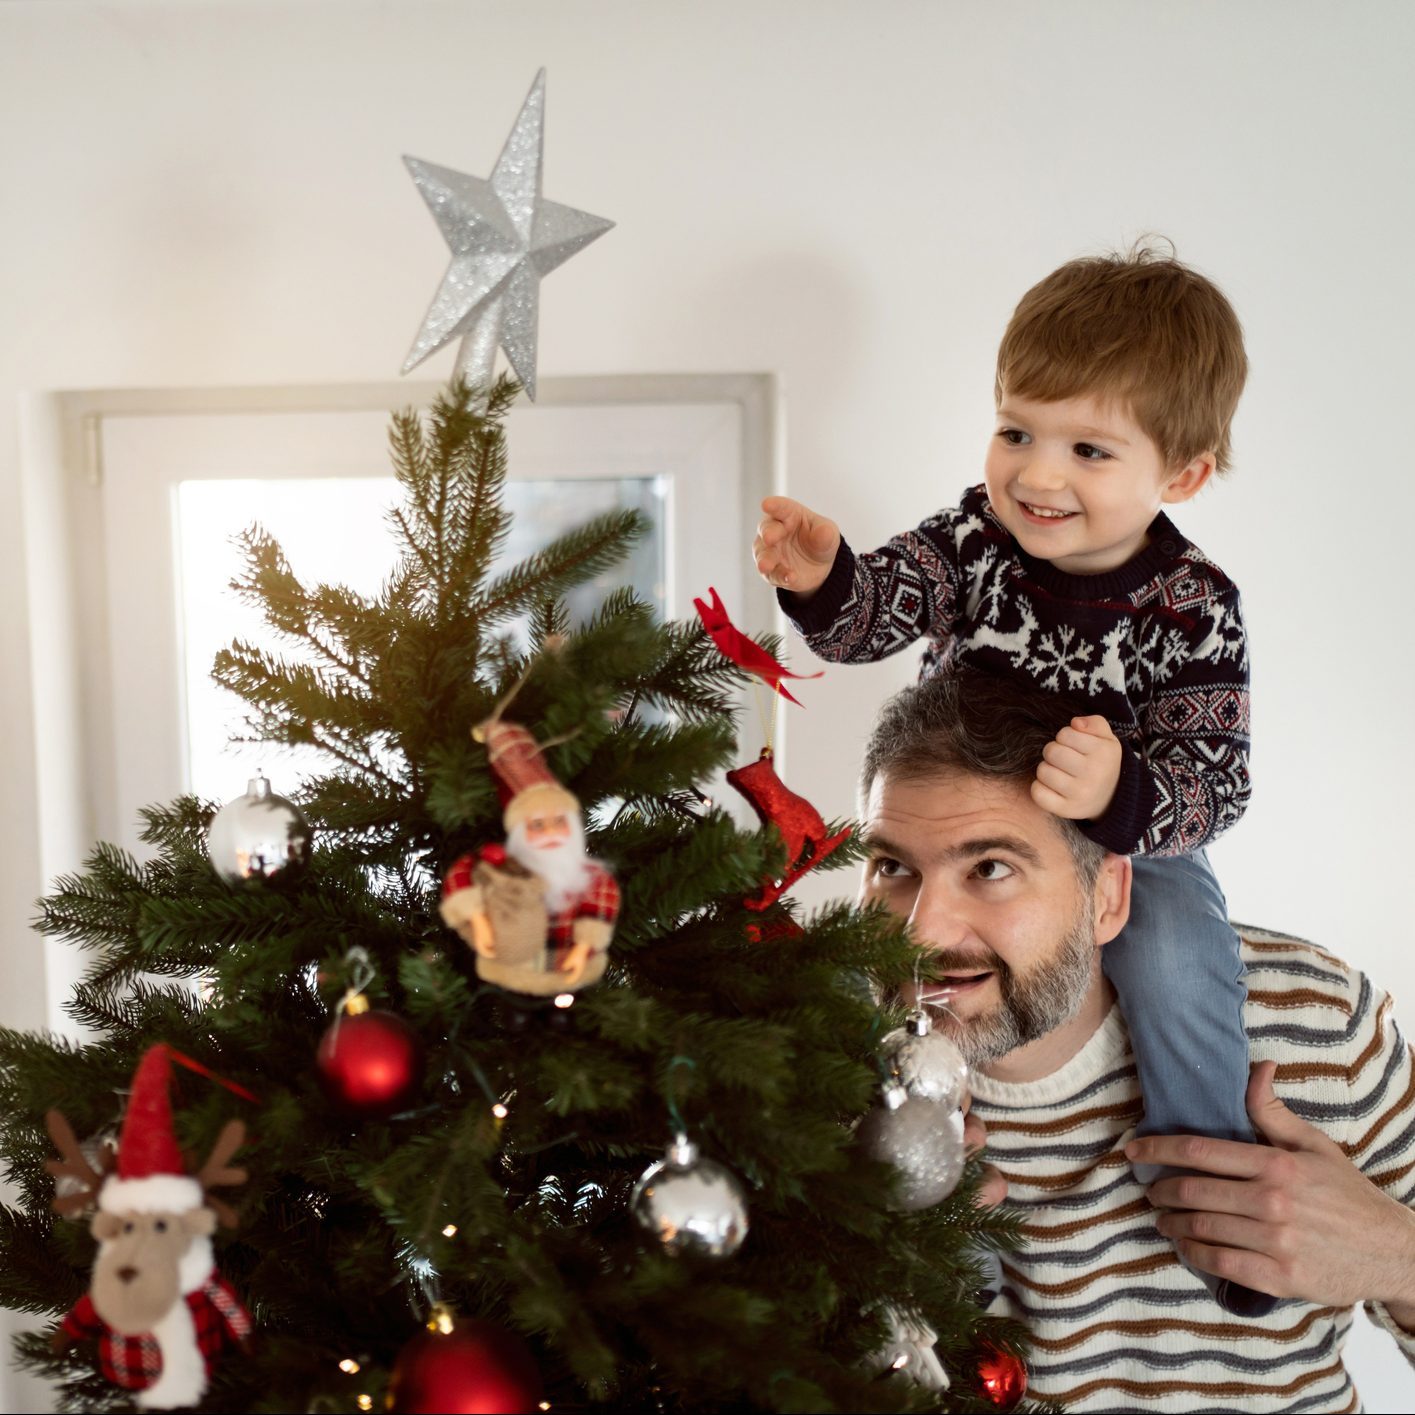 Father and his toddler son decorating a Christmas tree together